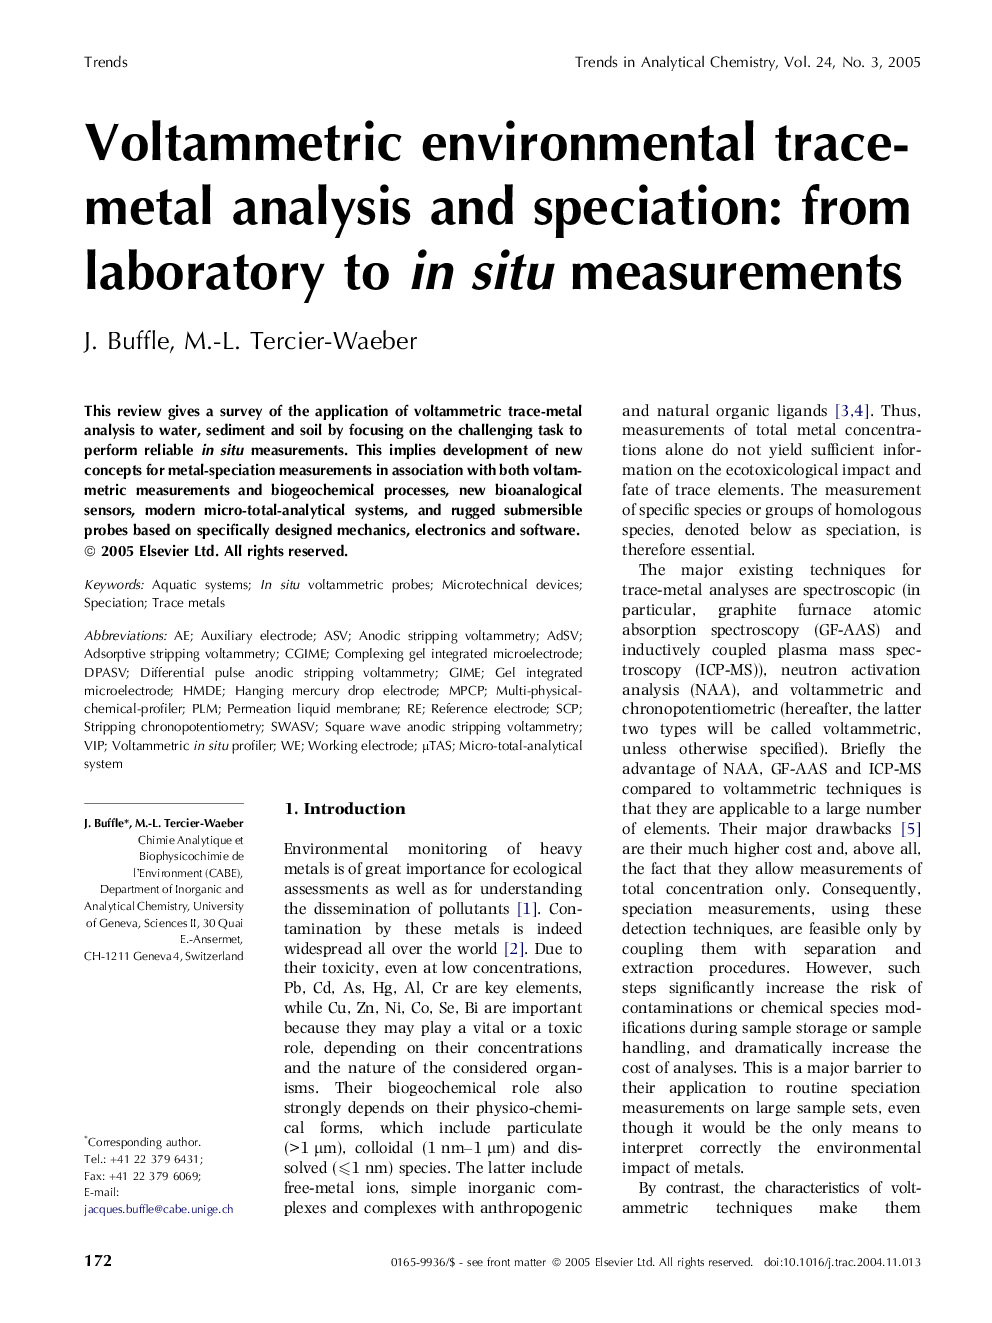 Voltammetric environmental trace-metal analysis and speciation: from laboratory to in situ measurements